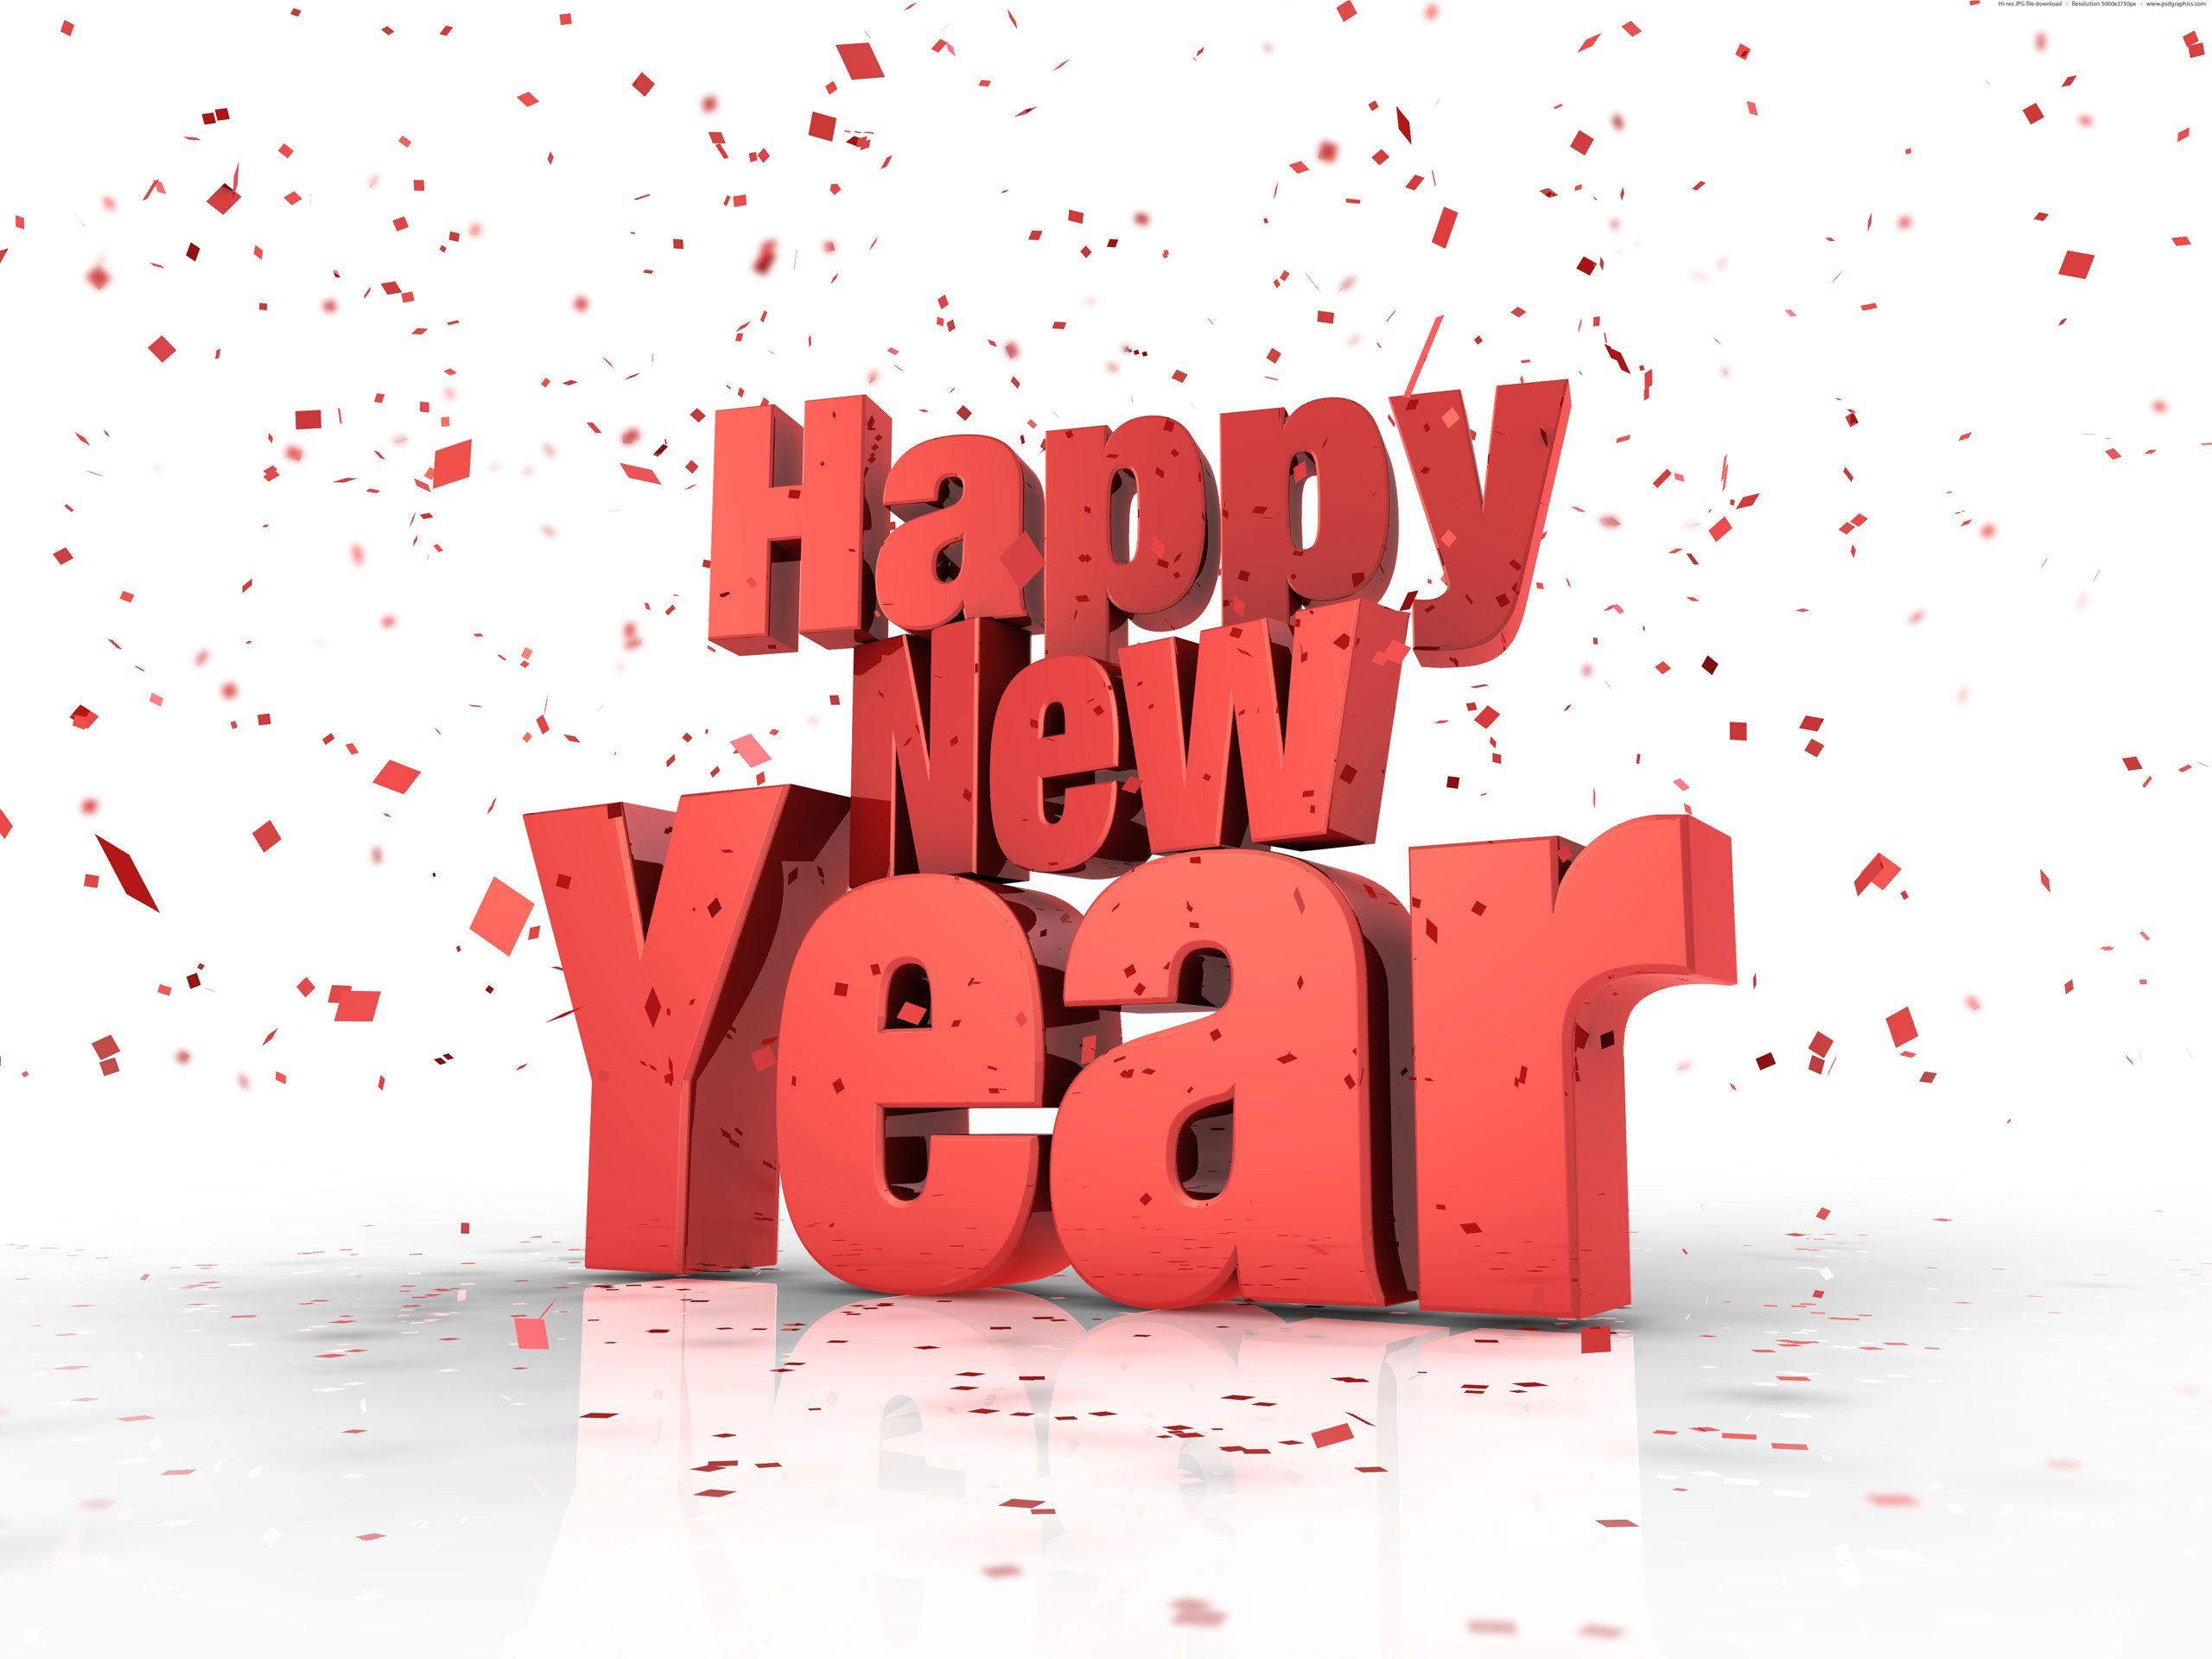 Free Wallpapers – Happy New Year wallpapers